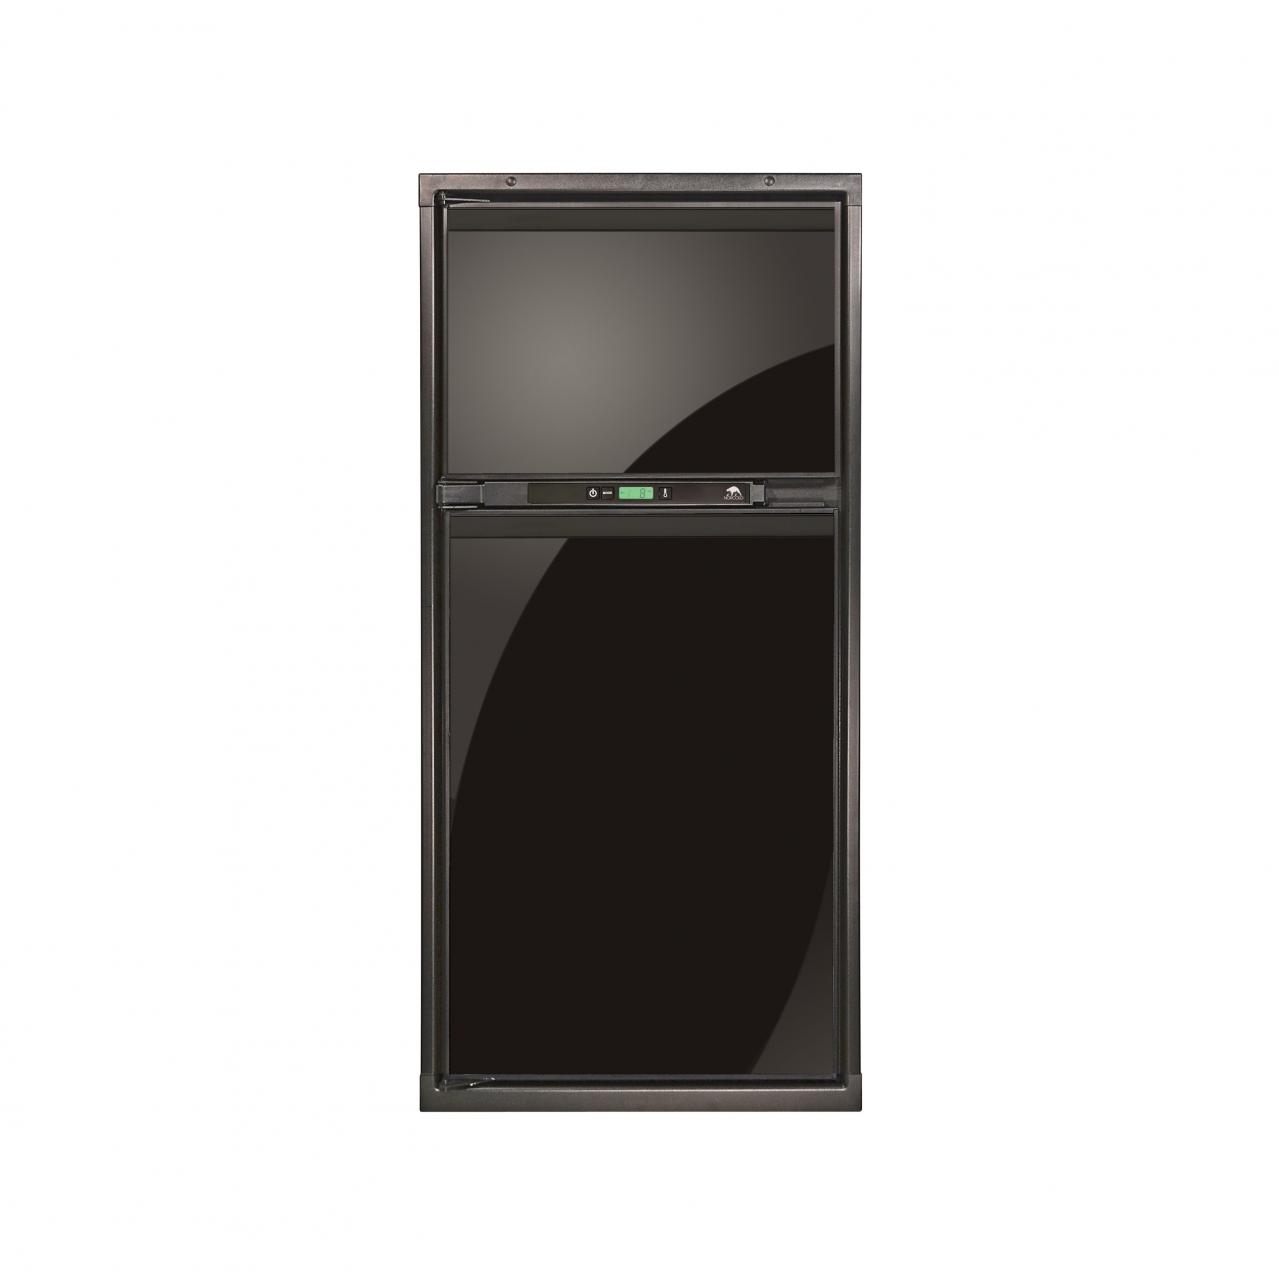 The NX641 RV refrigerator series - Superior quality inside and out